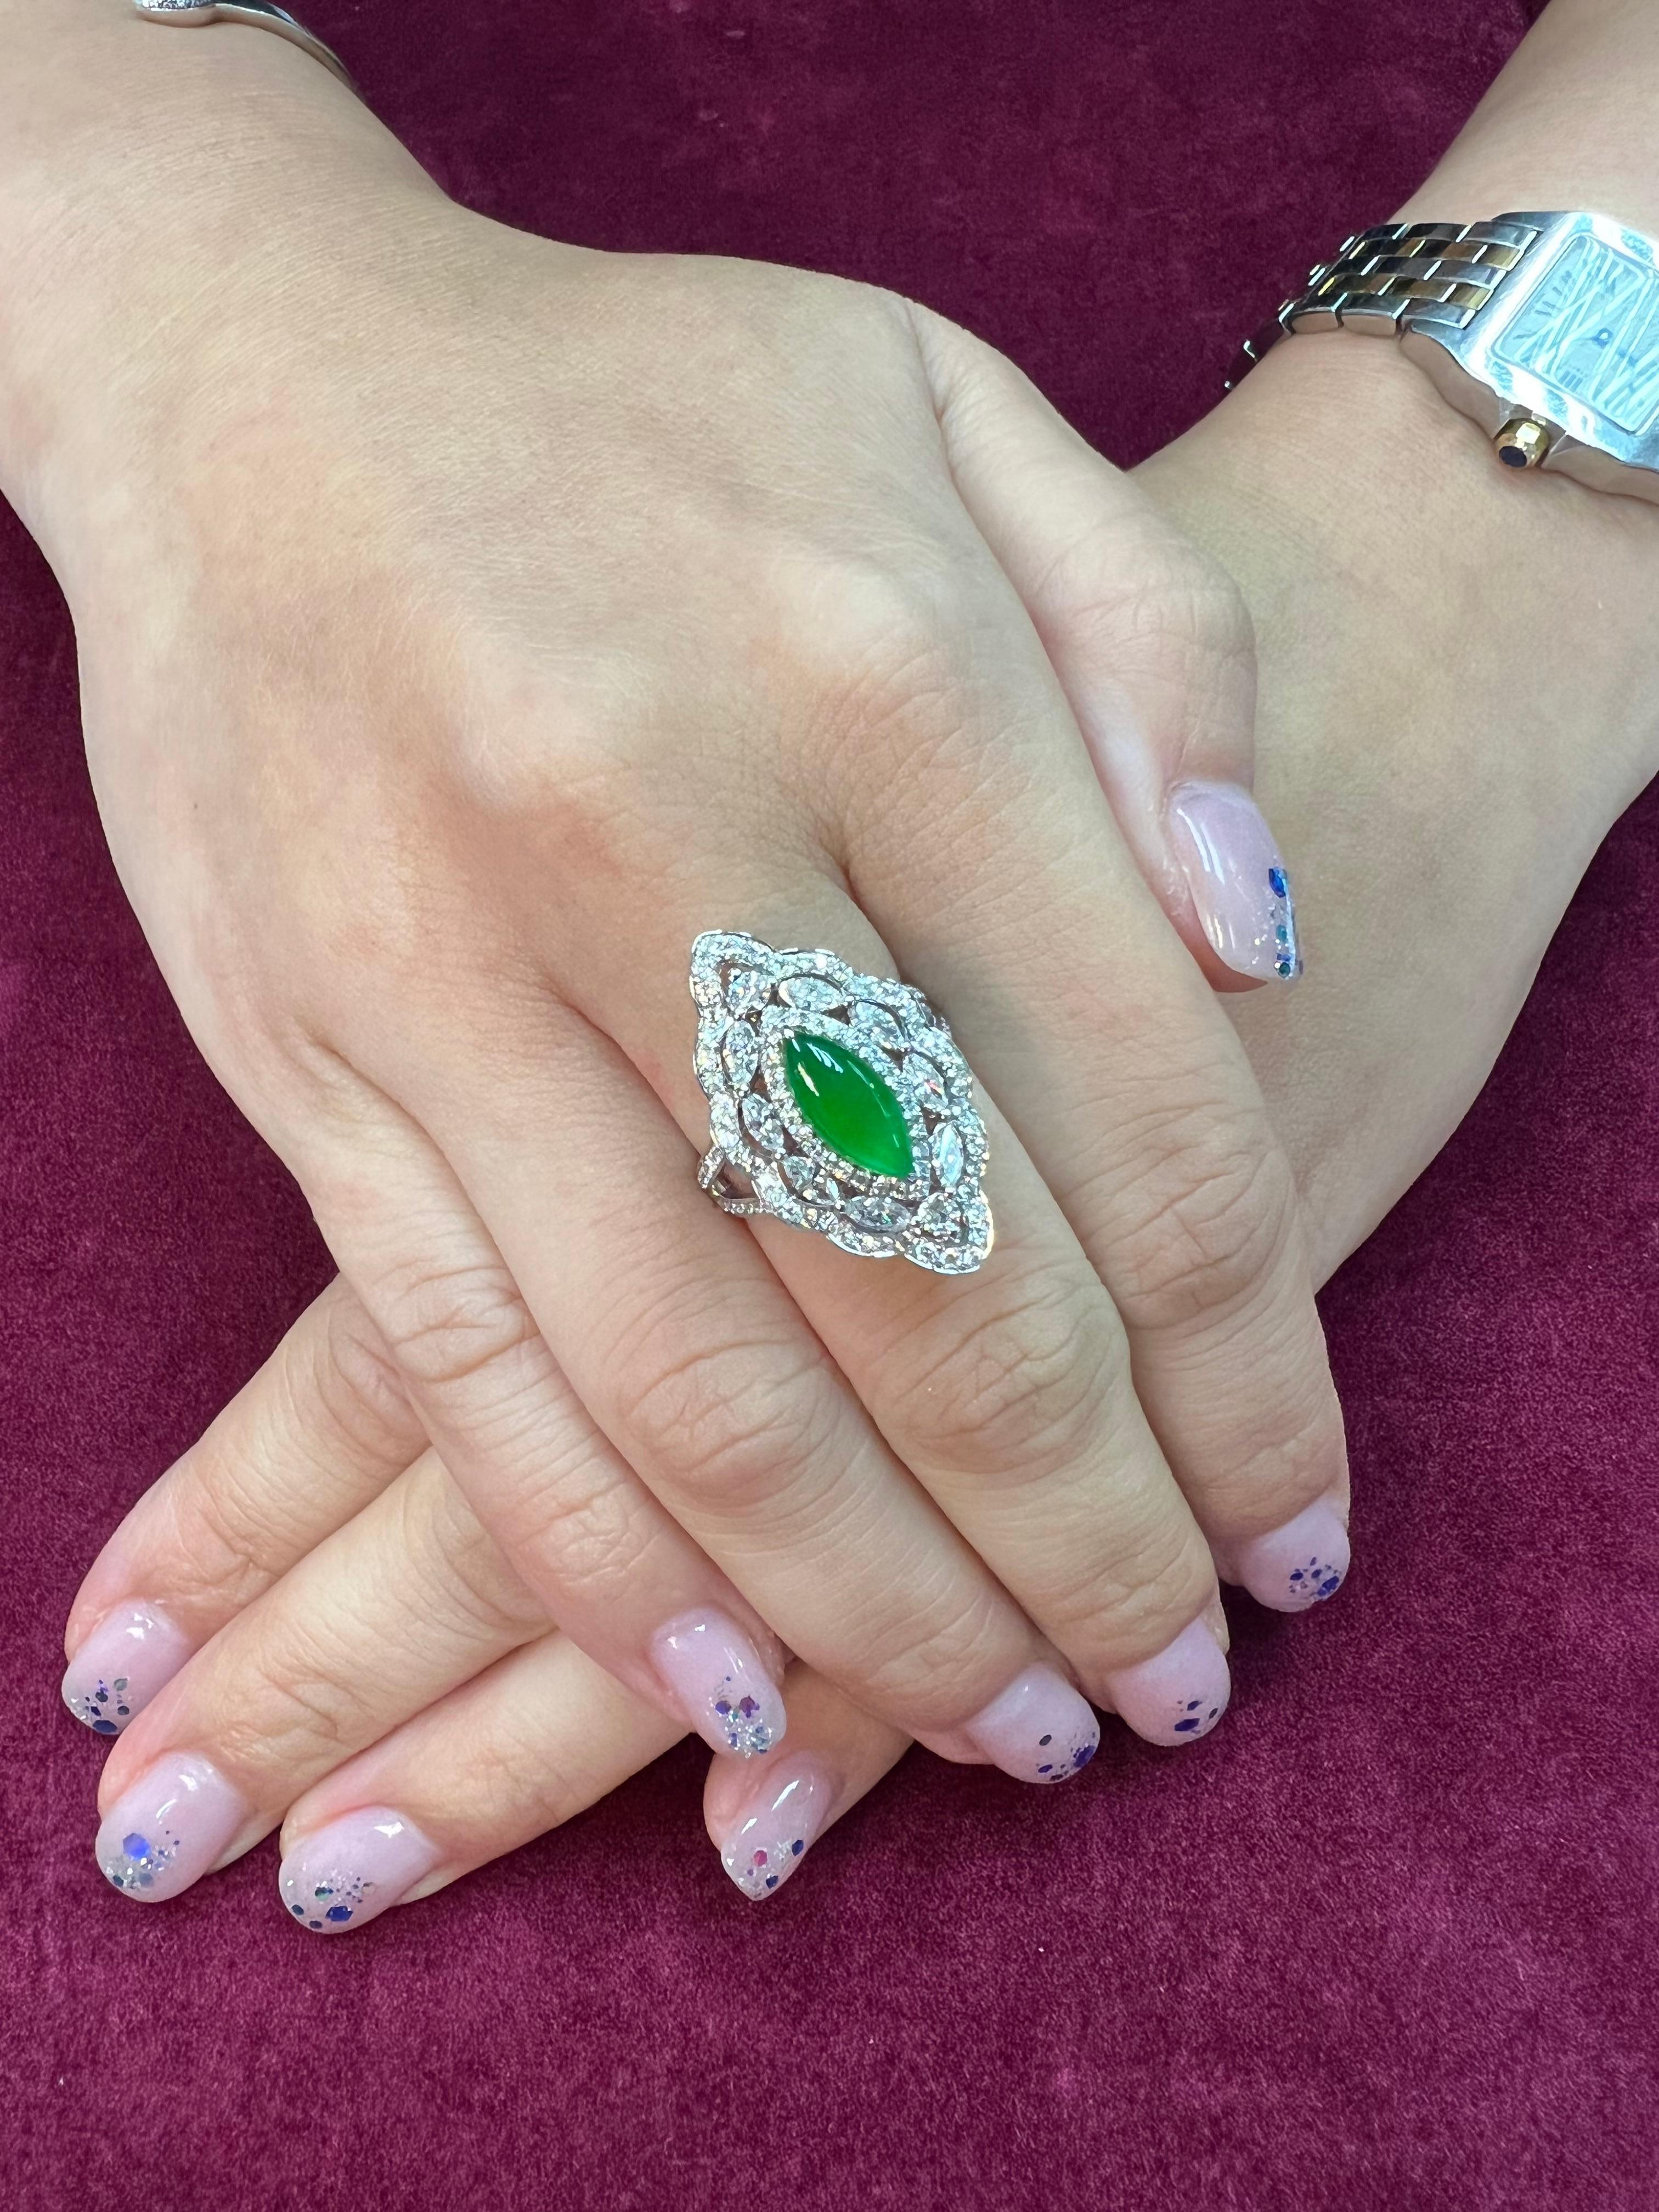 Please check out the HD video. The GLOW (under normal light) on this jade is excellent! It's even nicer in person than any videos or photos. Here is a bright apple green Jade and diamond ring / pendant. This is a versatile piece, you can wear it as